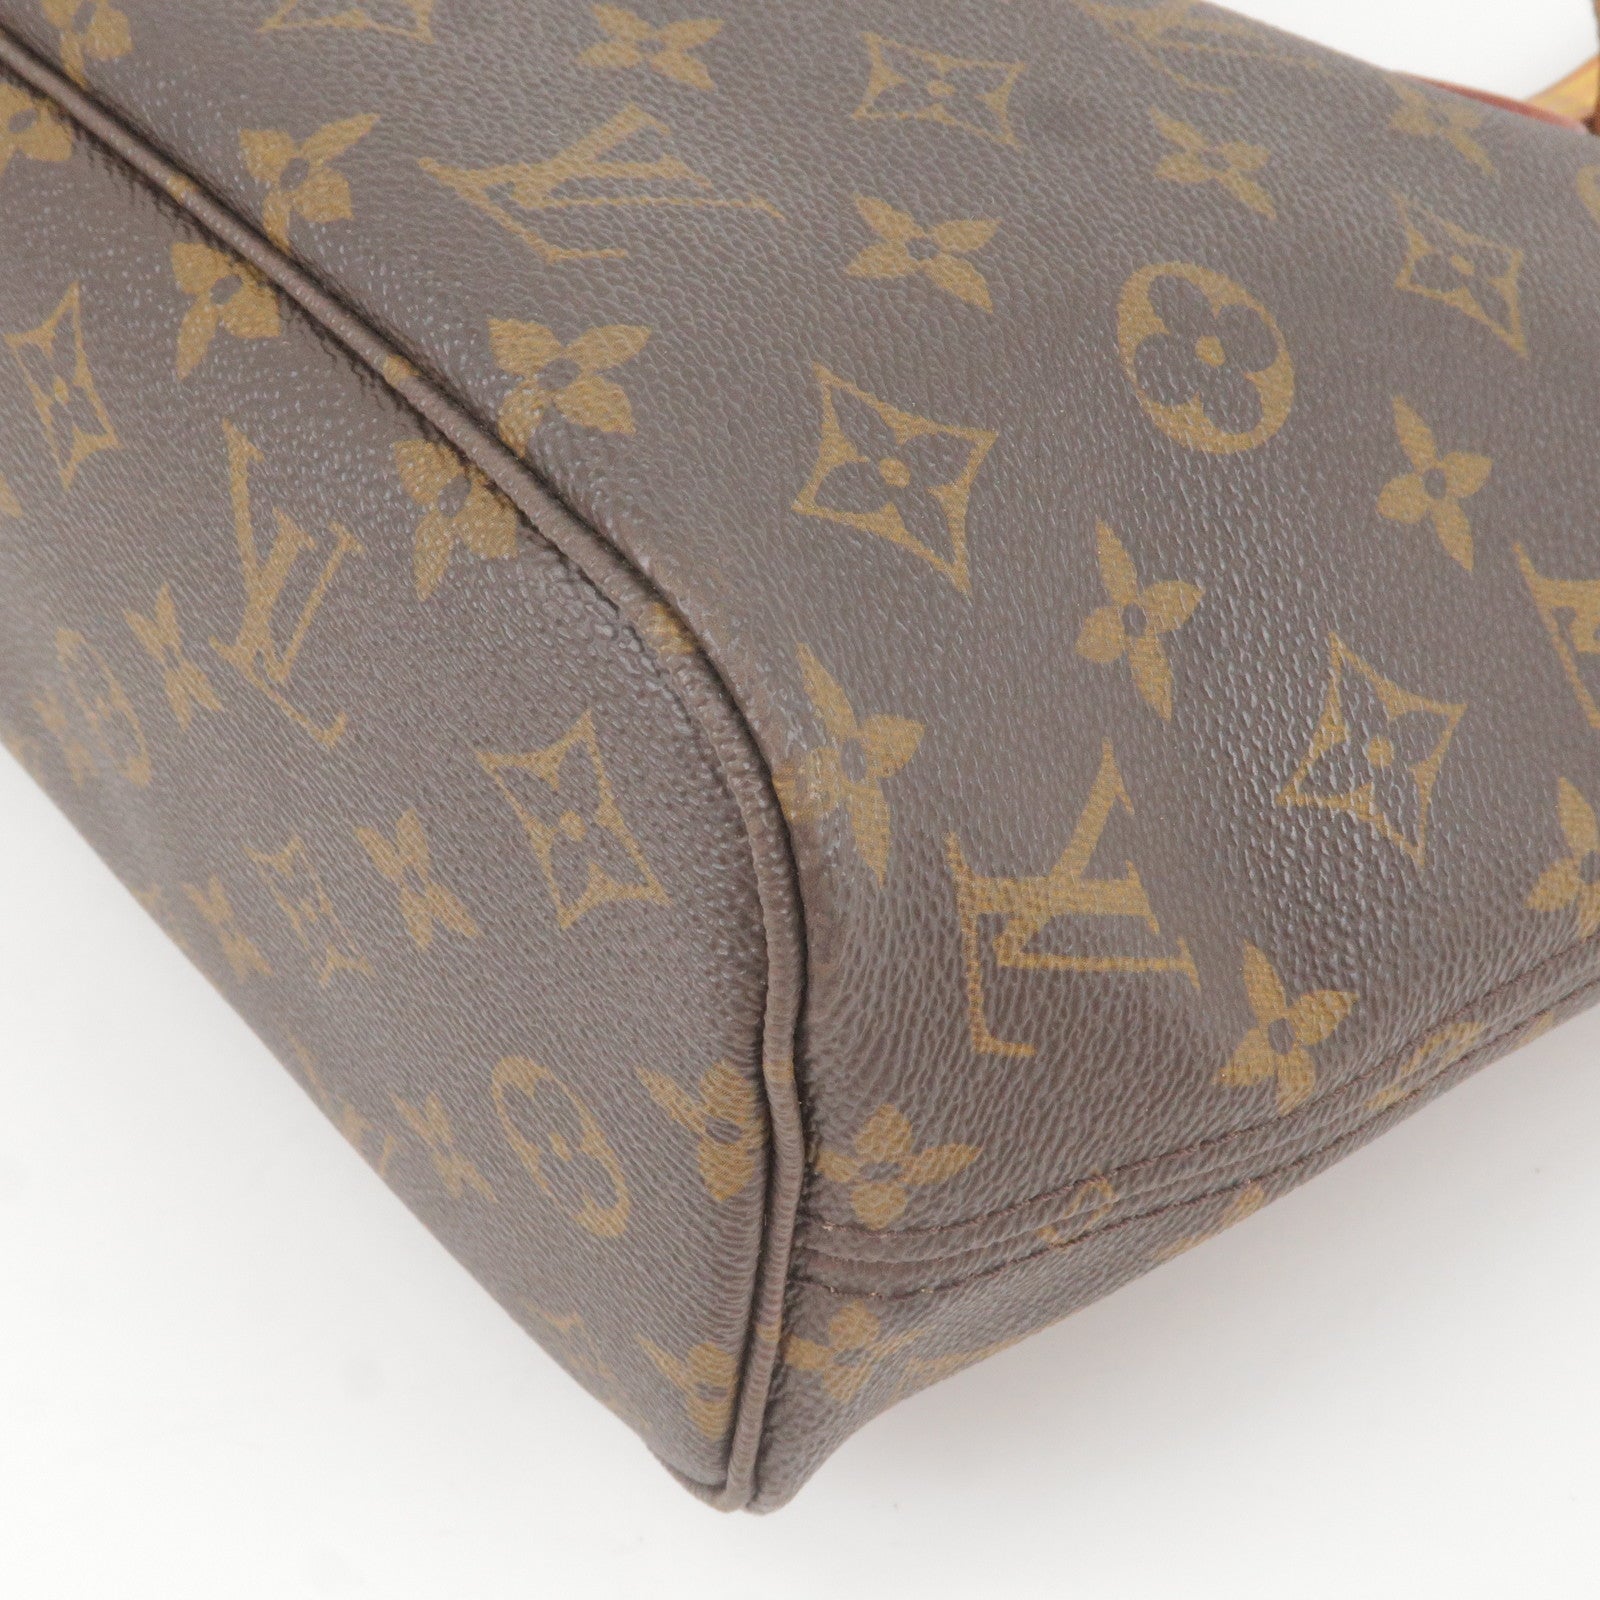 Neverfull - ep_vintage luxury Store - Vuitton - Tote - Bag